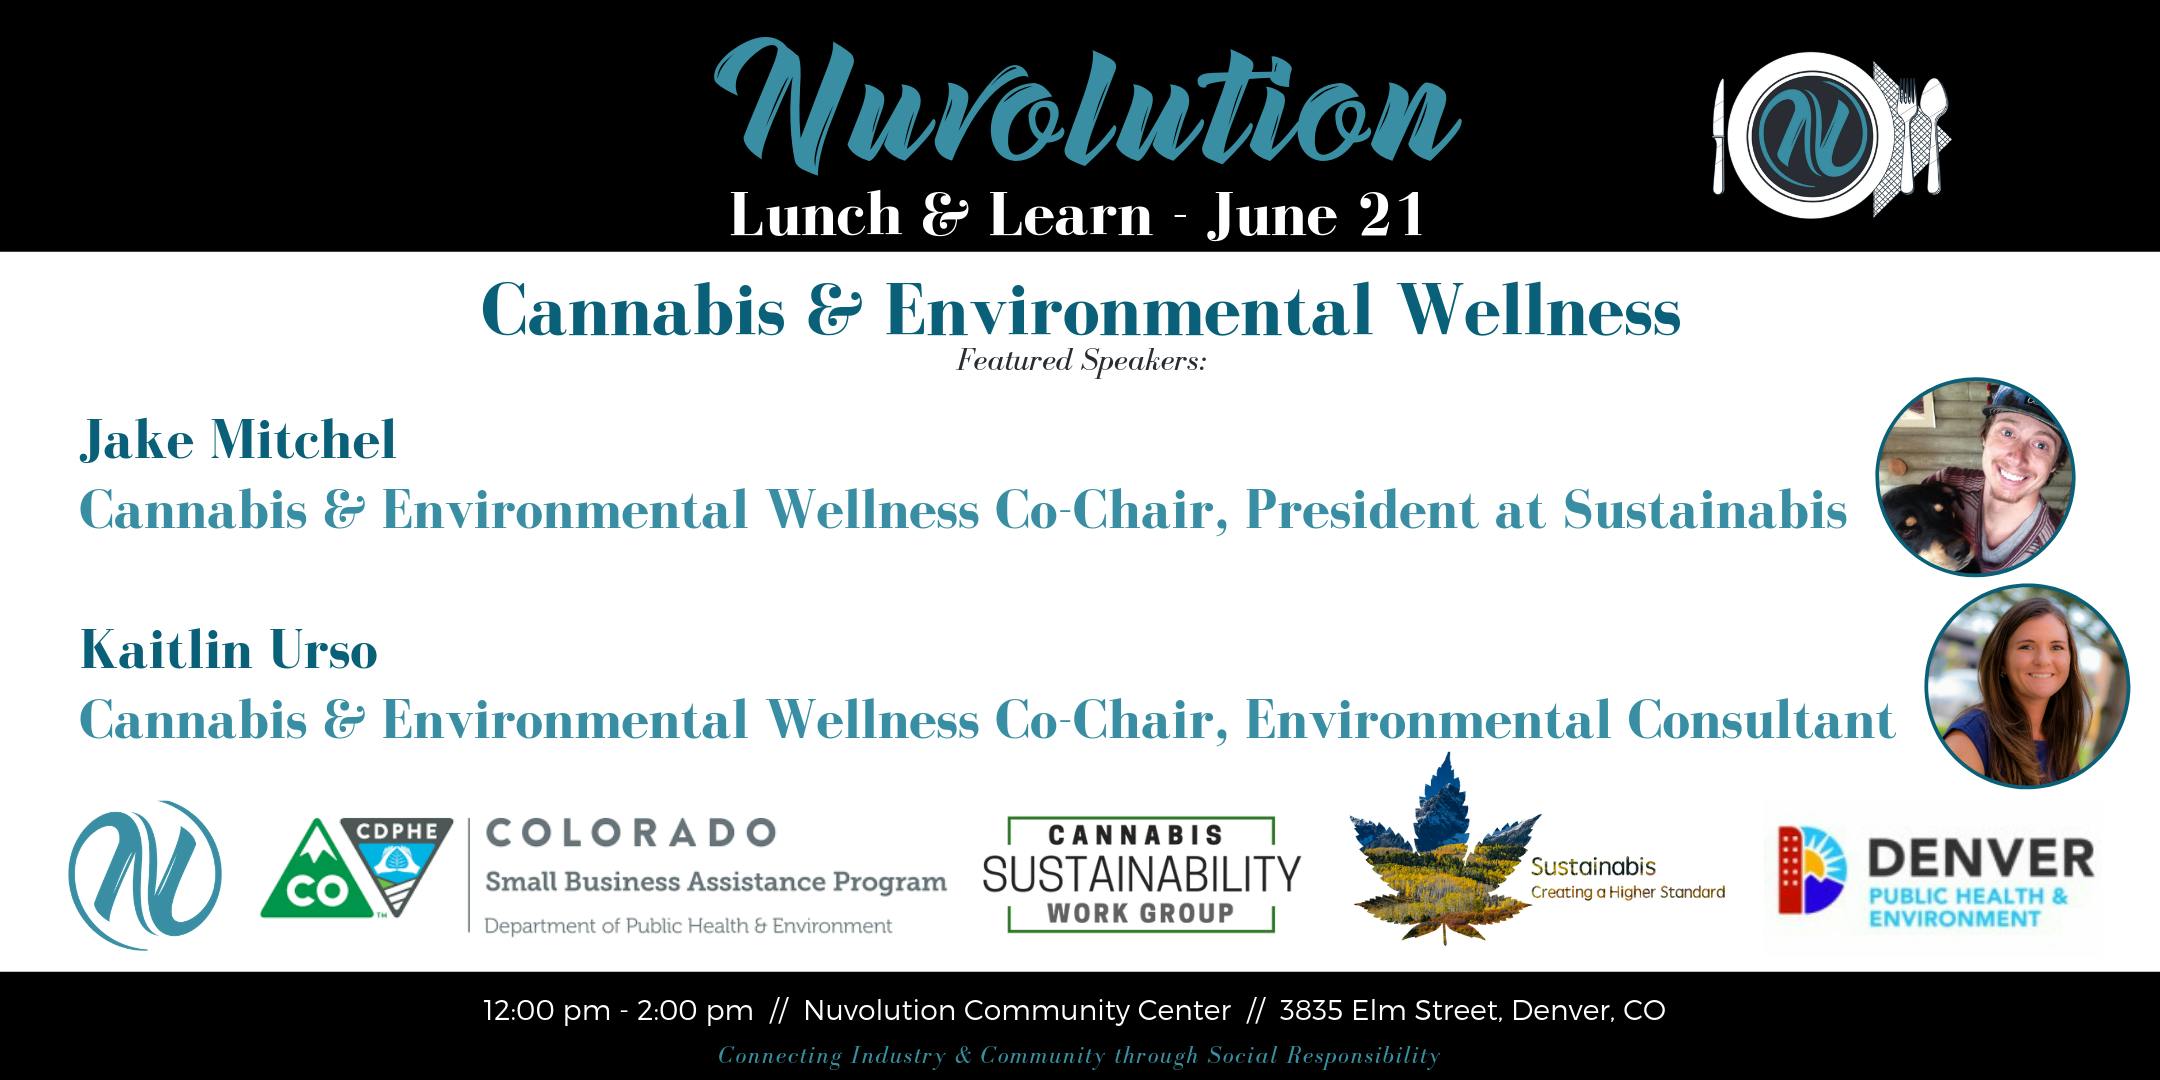 Nuvolution Lunch & Learn - June 21